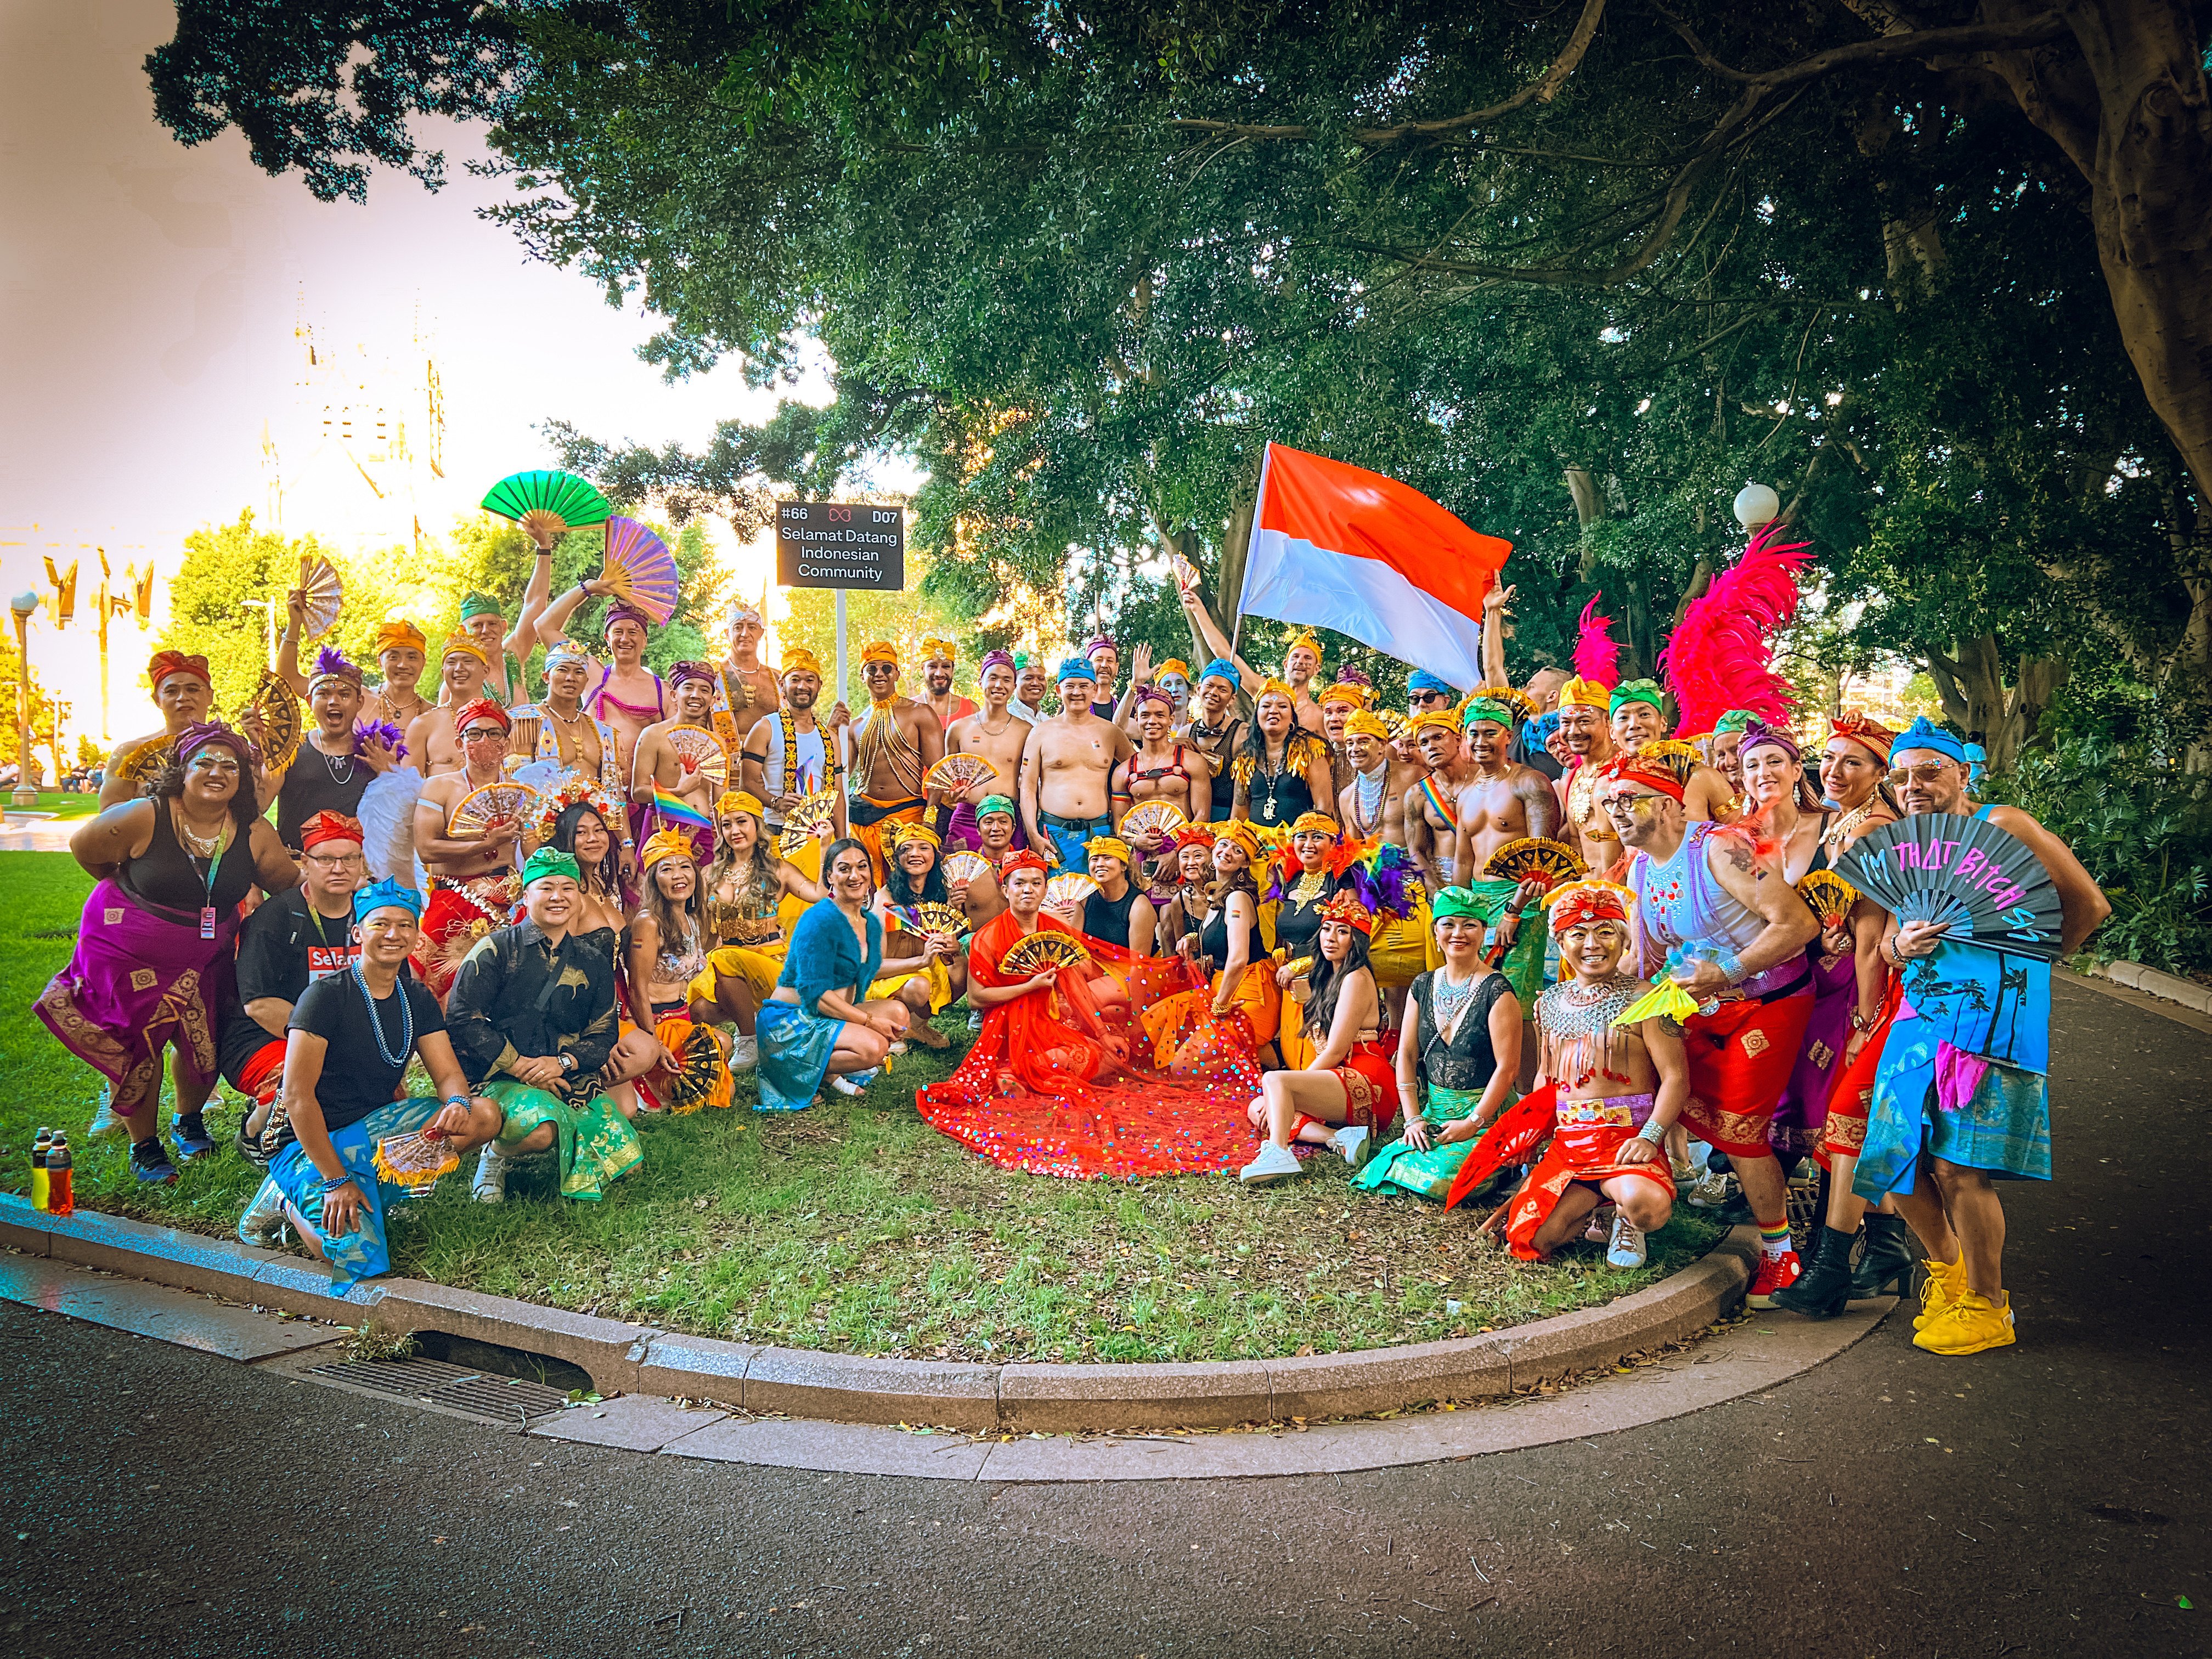 The Selamat Datang marchers at the 2023 Mardi Gras and World Pride event. Photo: Handout